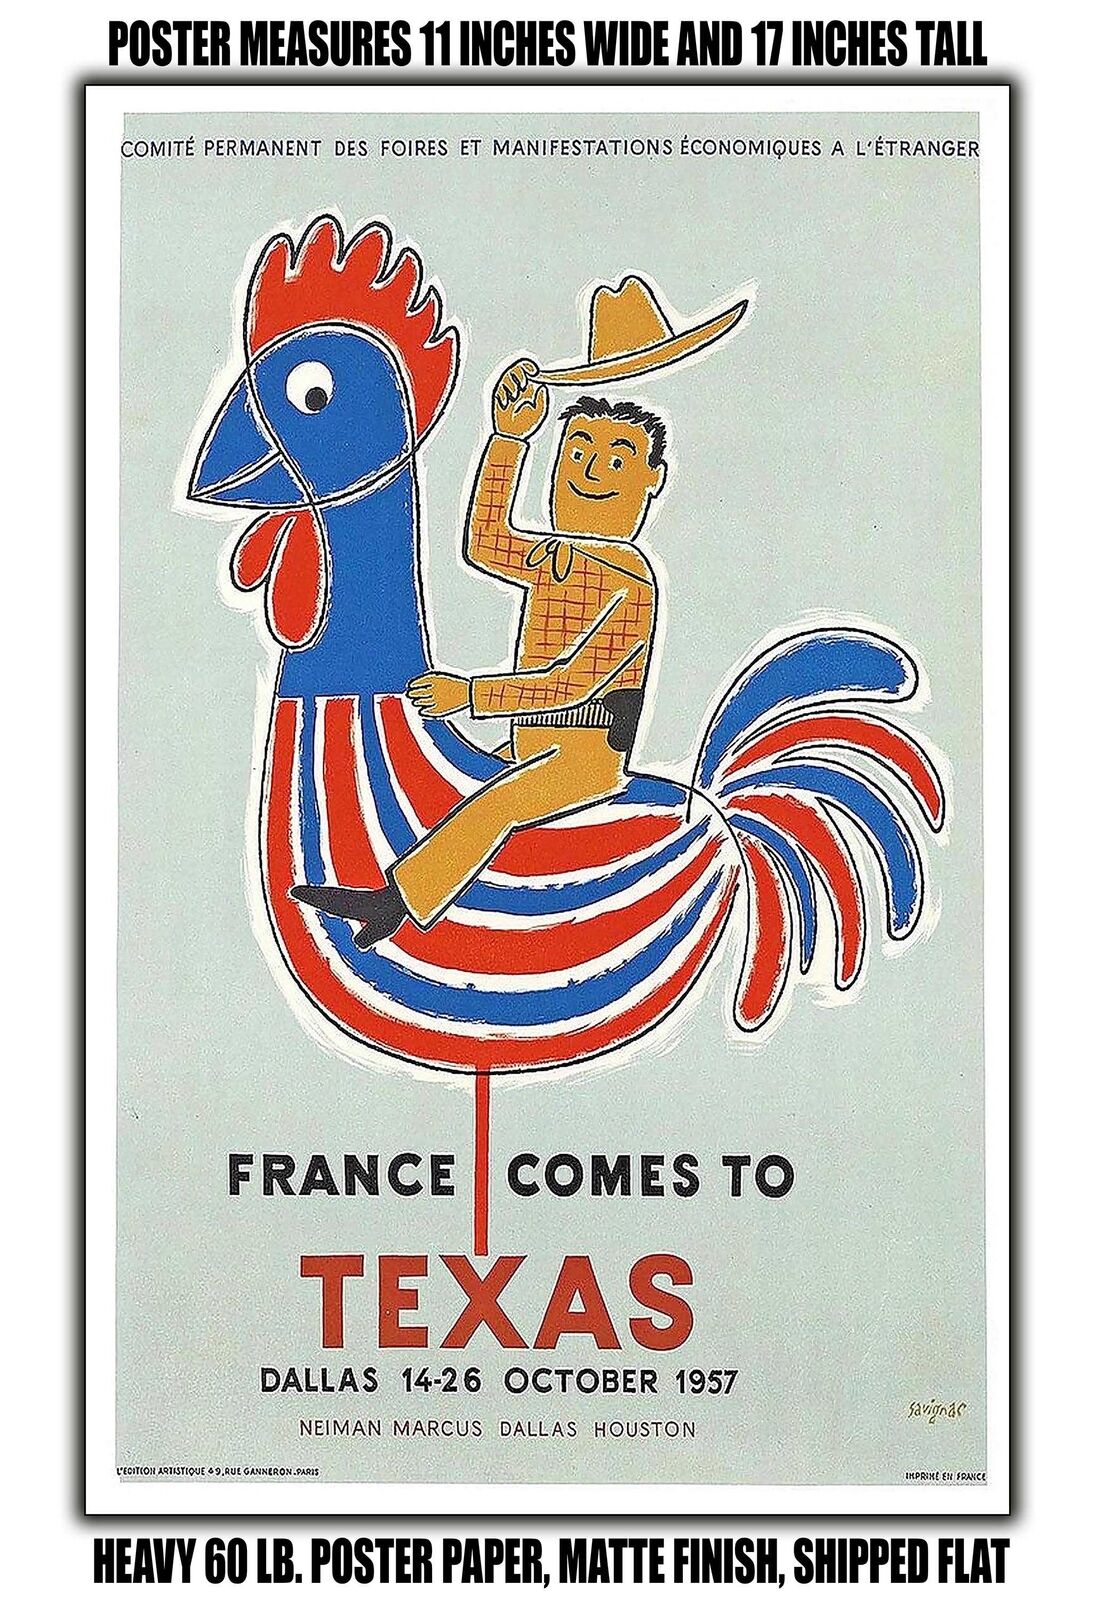 11x17 POSTER - 1957 France Comes to Texas Dallas